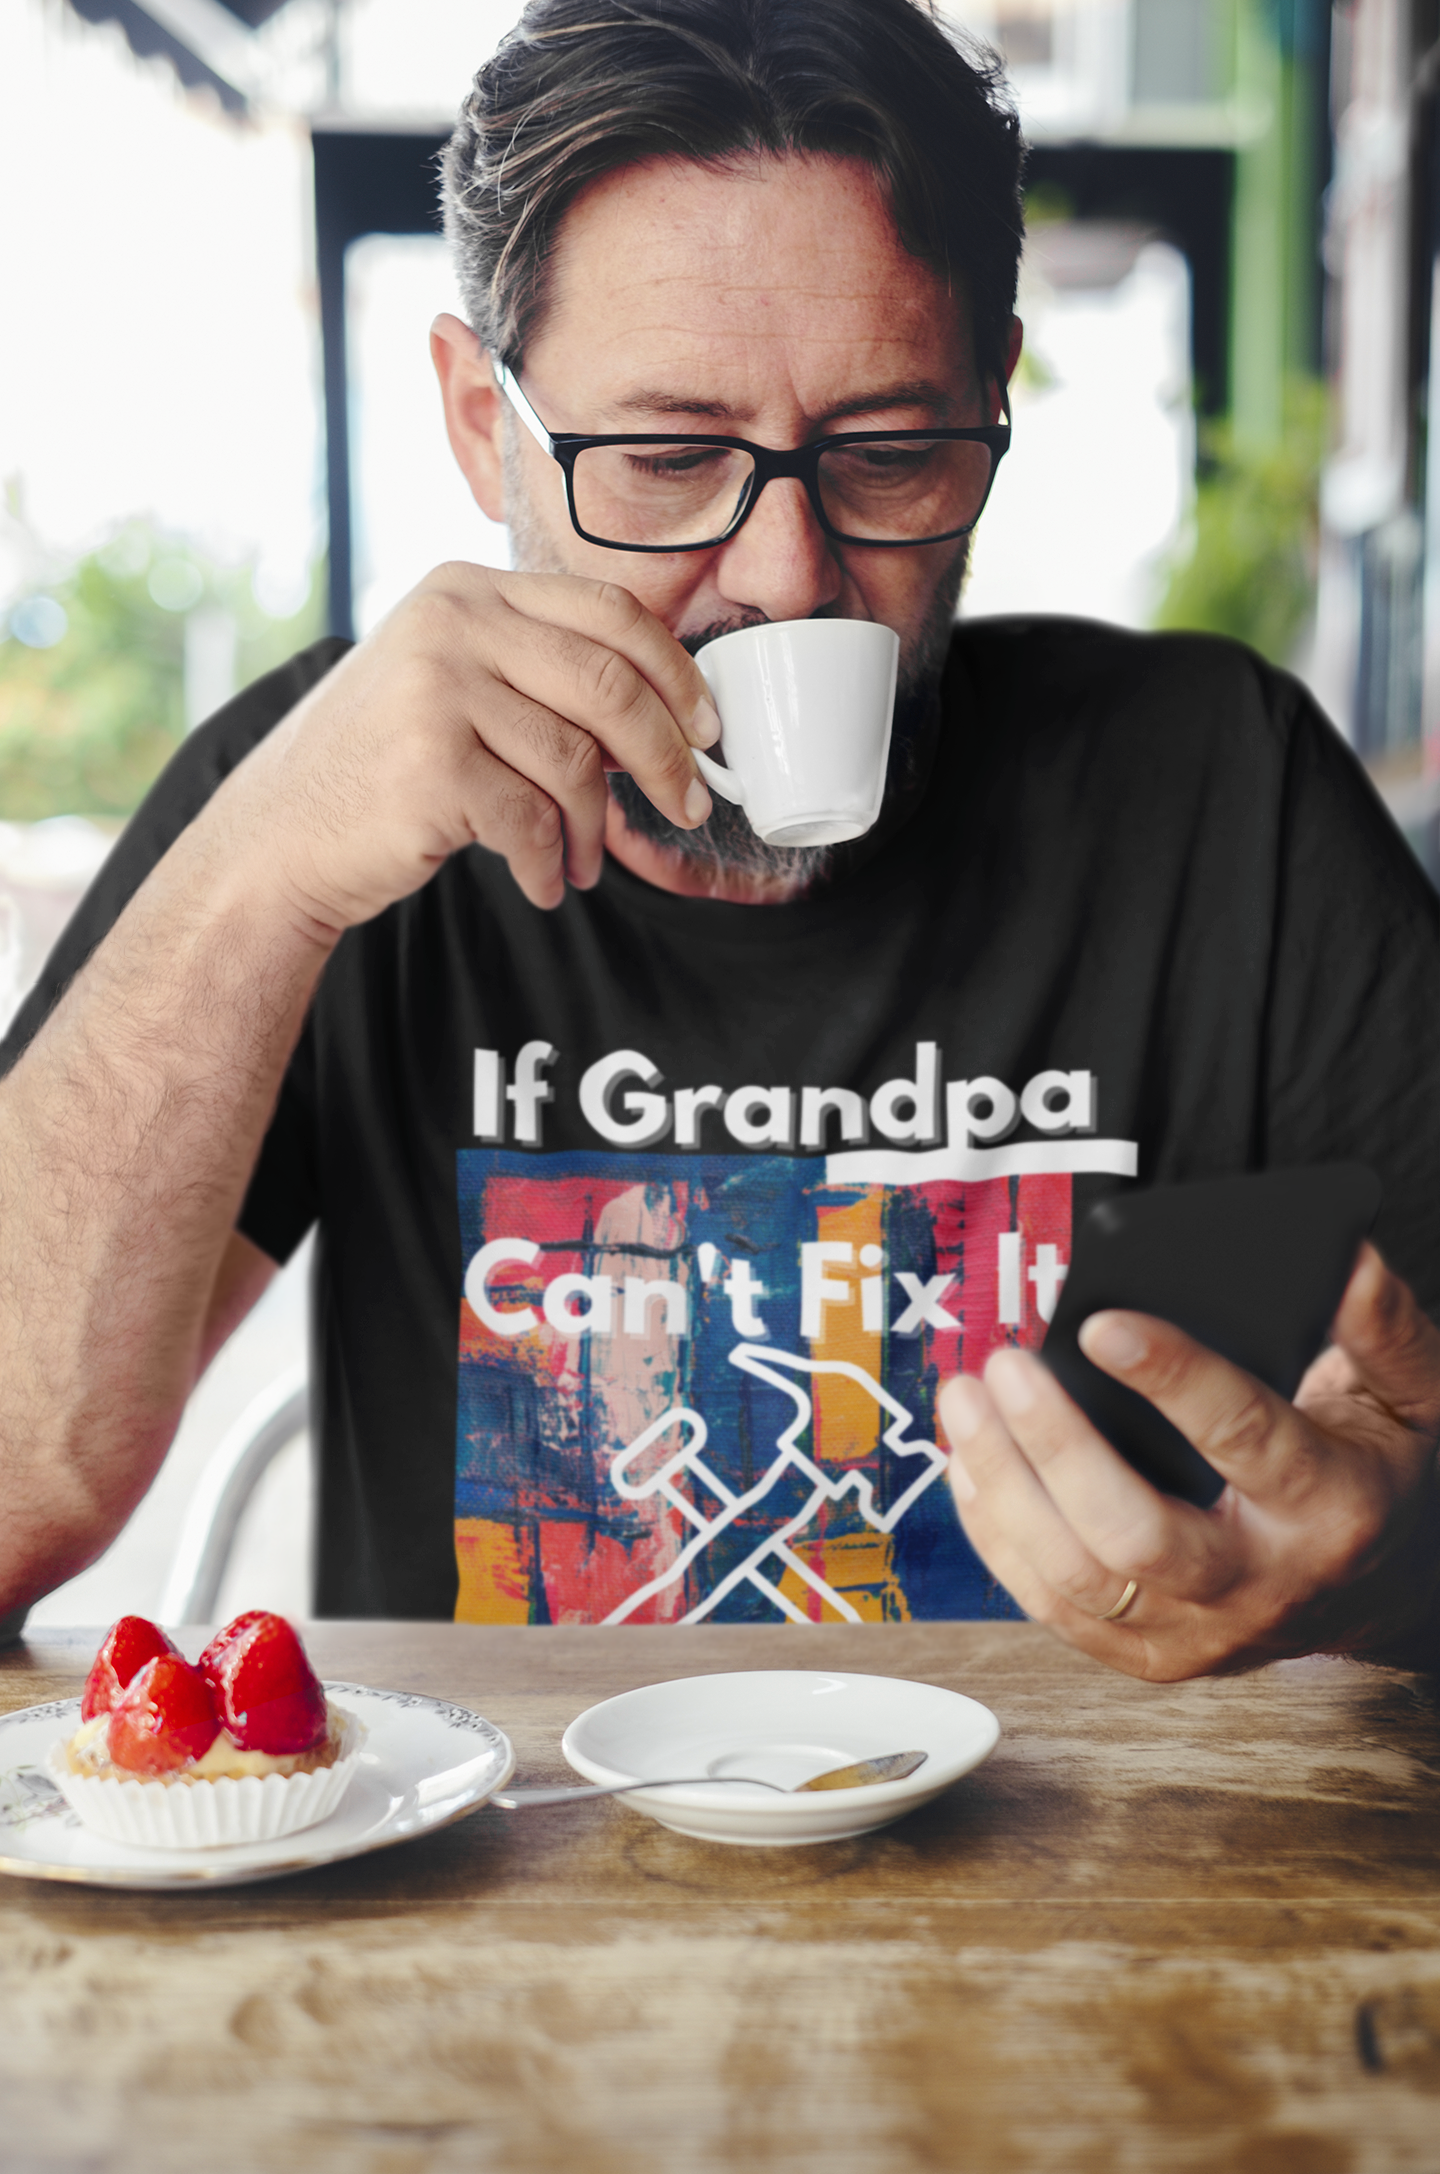 https://www.candidpot.com/products/if-grandpa-cant-fix-it-were-all-screwed-shirt-funny-shirt-men-gift-for-grandpa-fathers-day-shirt-grandpa-shirt-dad-gift-funny-tshirt-unisex-heavy-cotton-tee